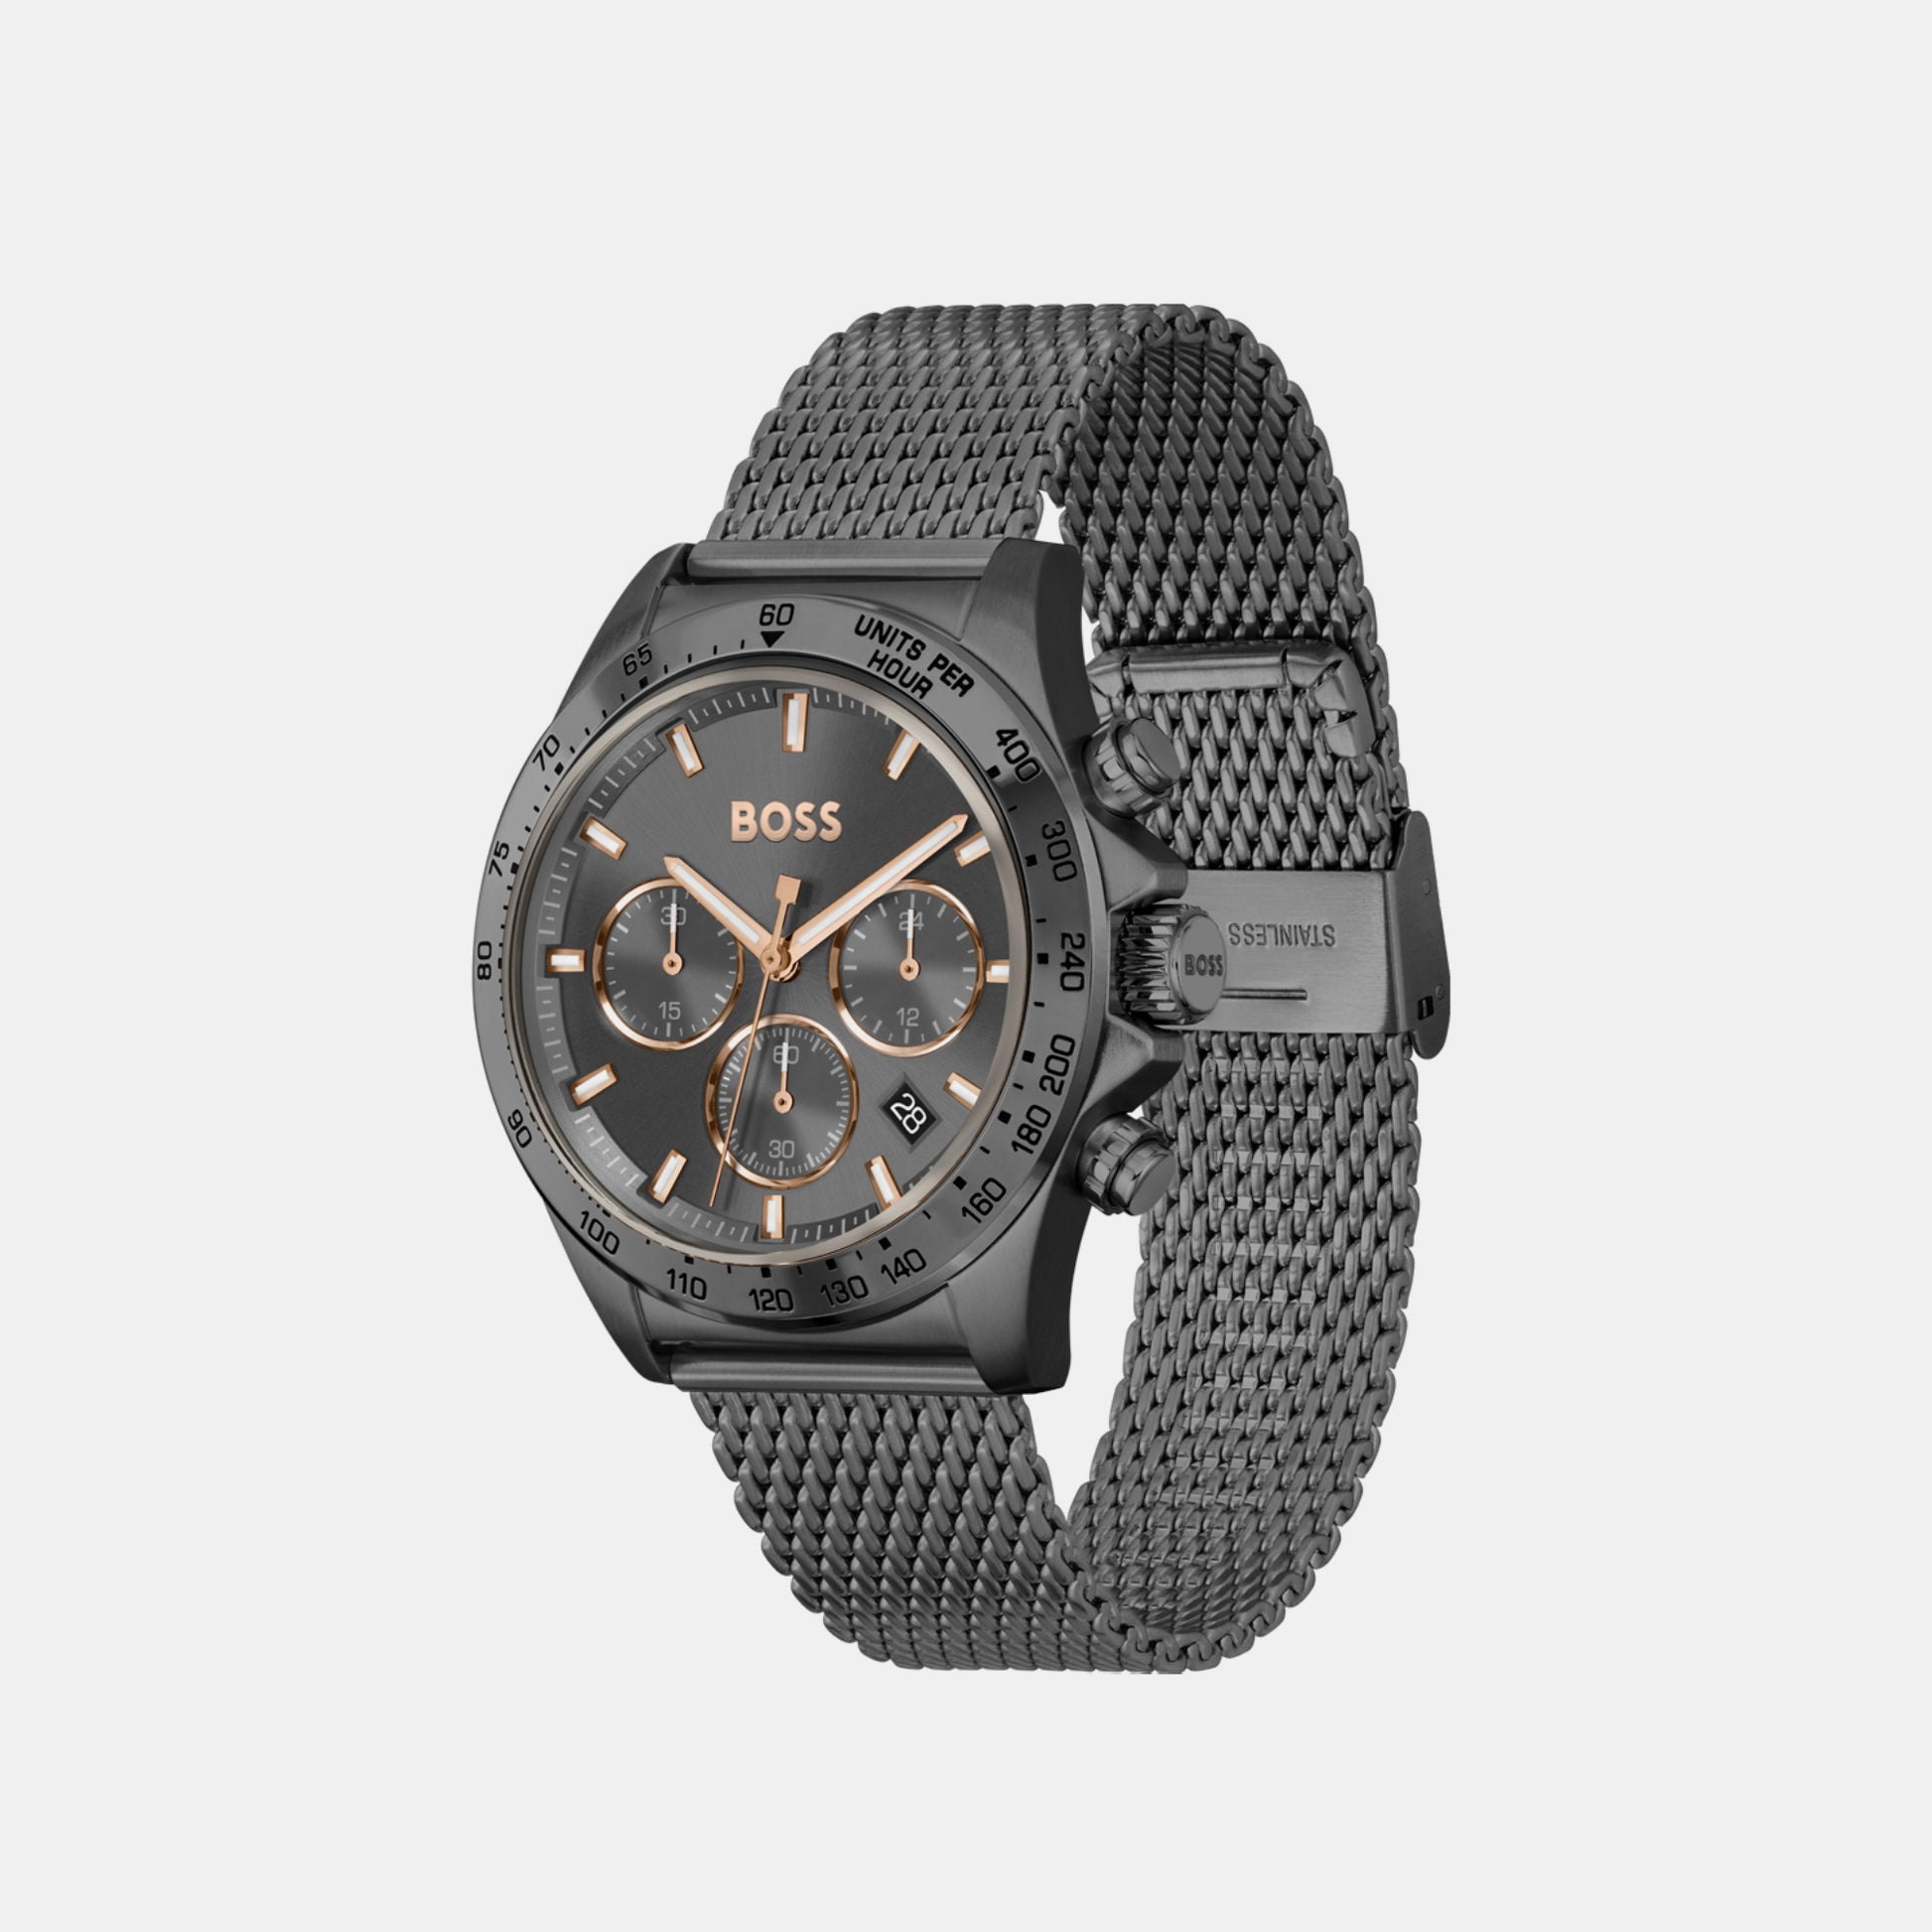 Hero Male Grey Chronograph 1514021 Just Watch Time – In Mesh